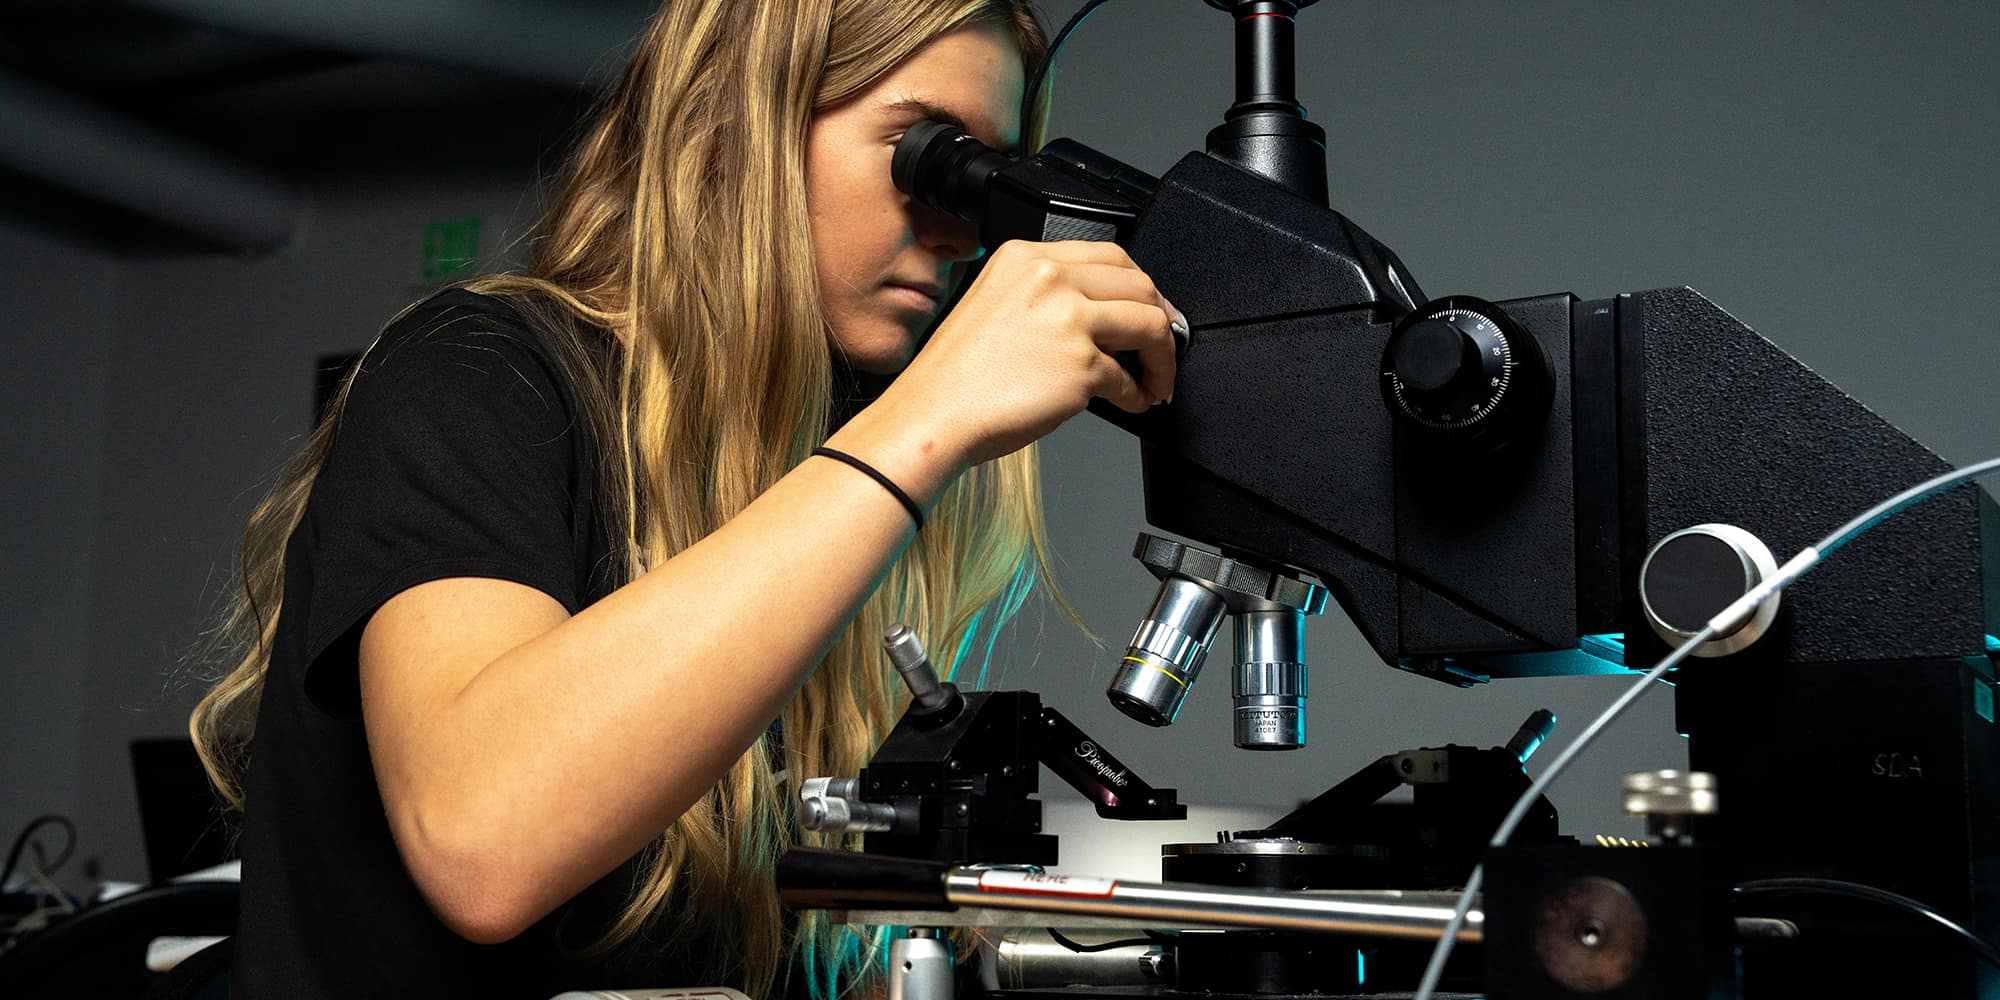 Research is huge at Embry-Riddle, and we’re proud to make graduate-level research opportunities available to undergraduate students.